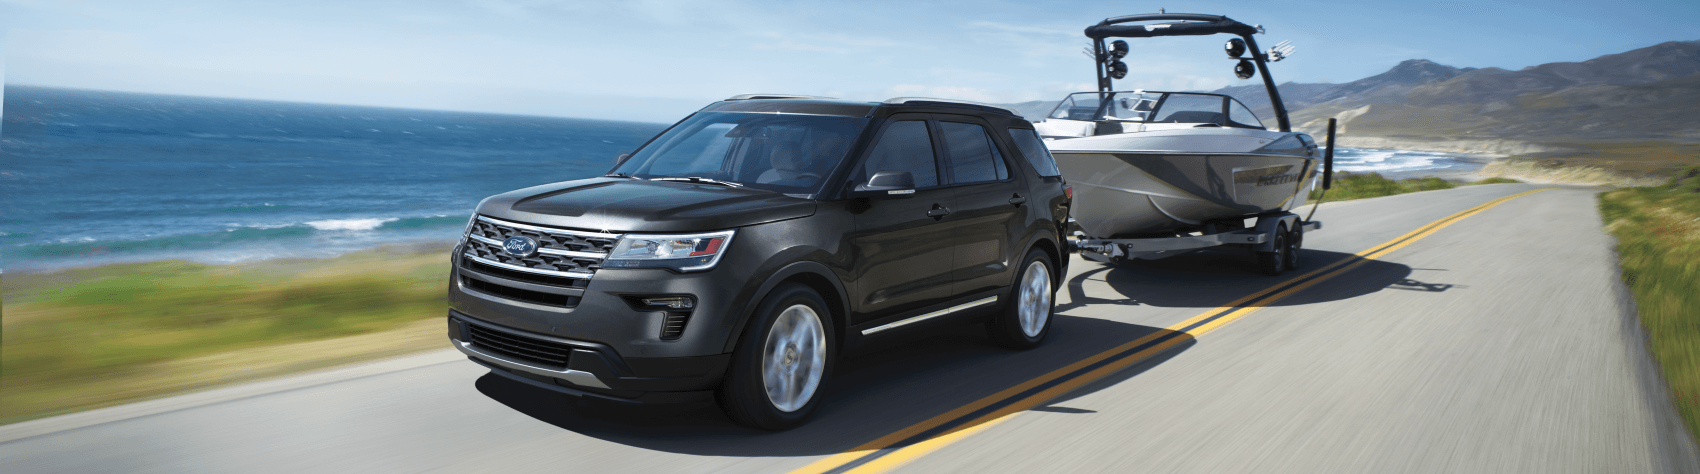 Used 2019 Ford Explorer XLT Black Towing Boat by Ocean Tunkhannock Ford near Wyoming County, PA